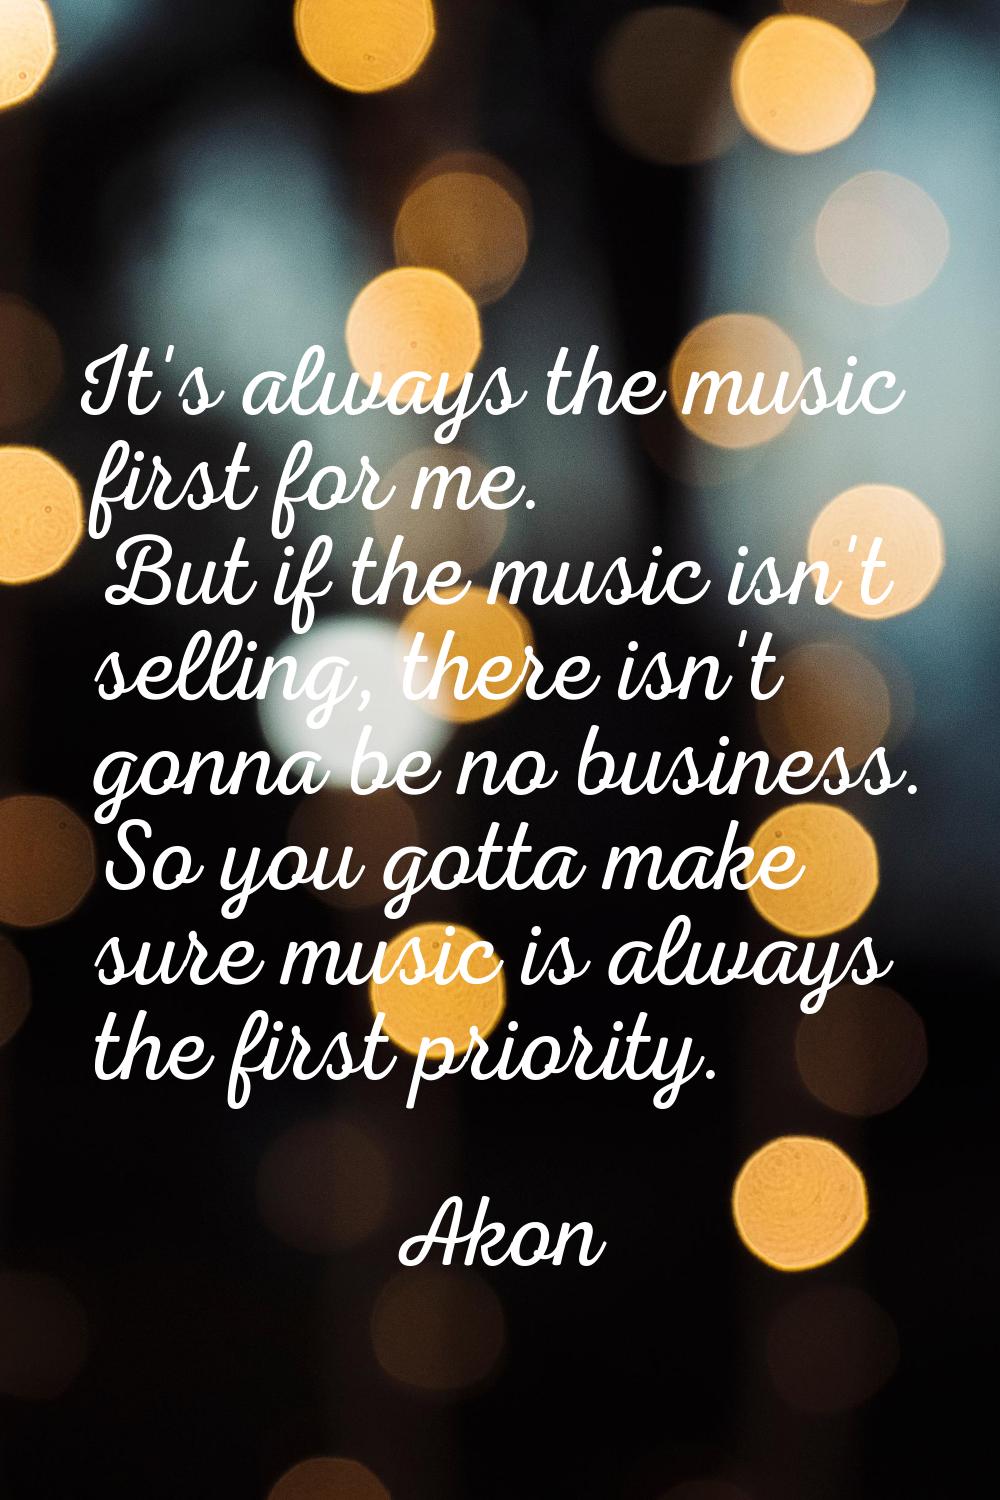 It's always the music first for me. But if the music isn't selling, there isn't gonna be no busines